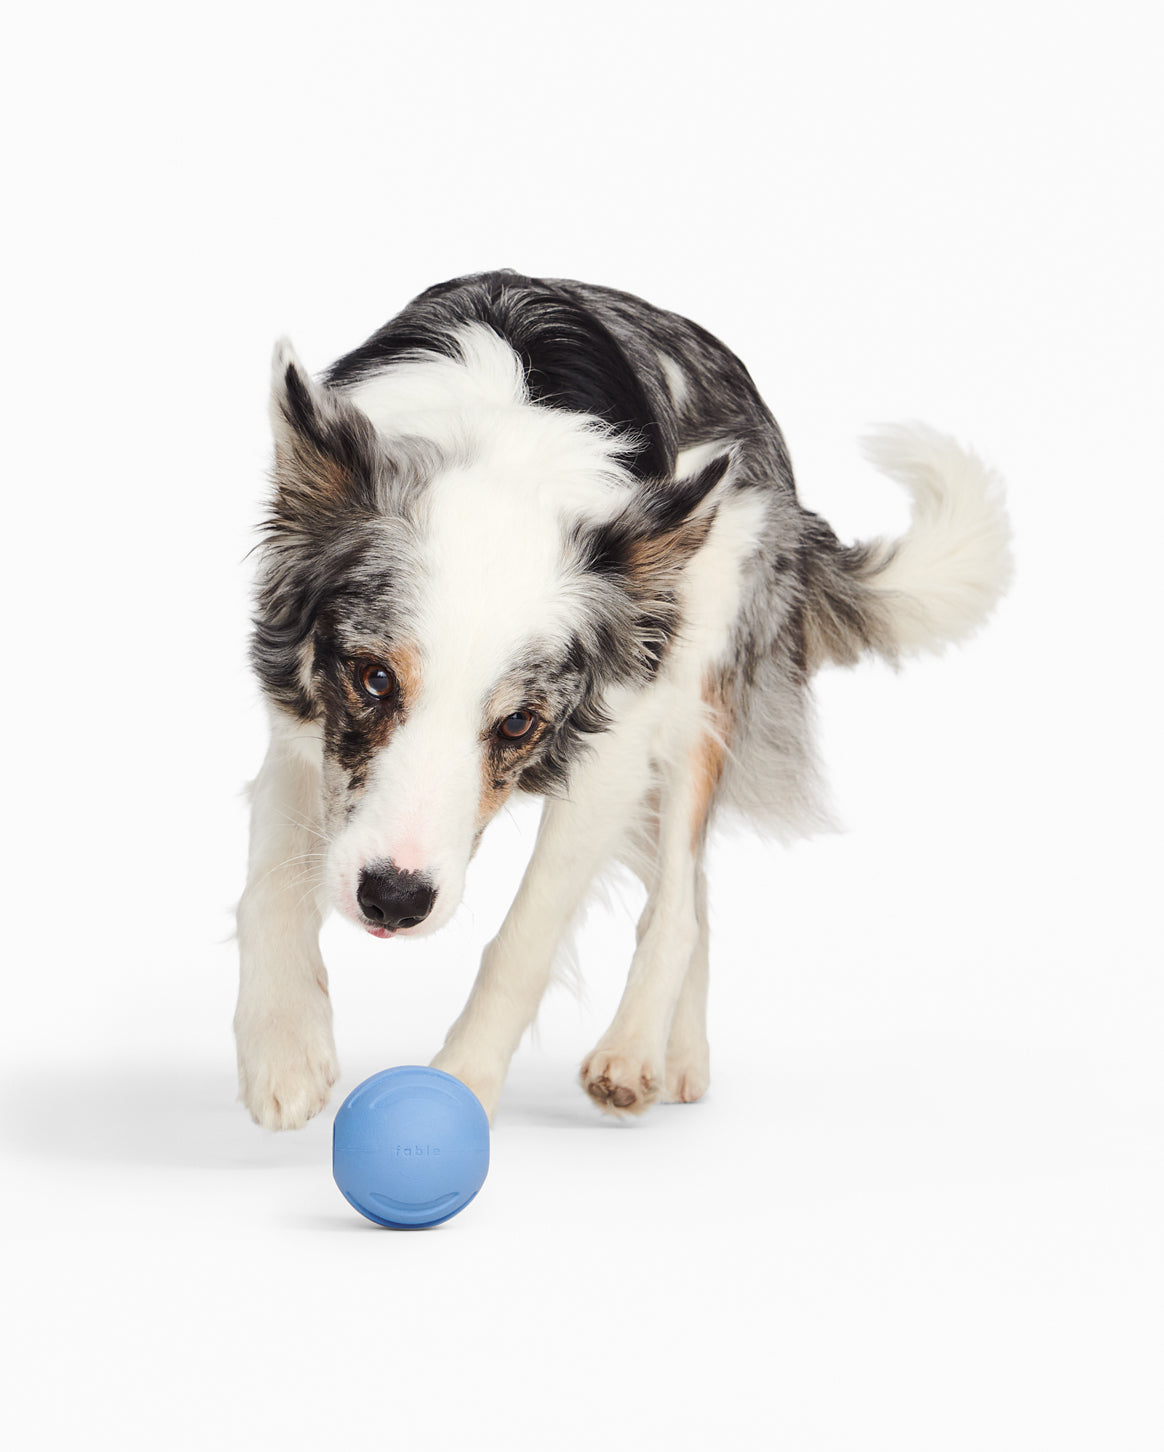 Fable Signature Ball - Interactive Rubber Dog Ball with Treat openings - for Most Breeds and Sizes - Durable Dog Toy Ball - 2